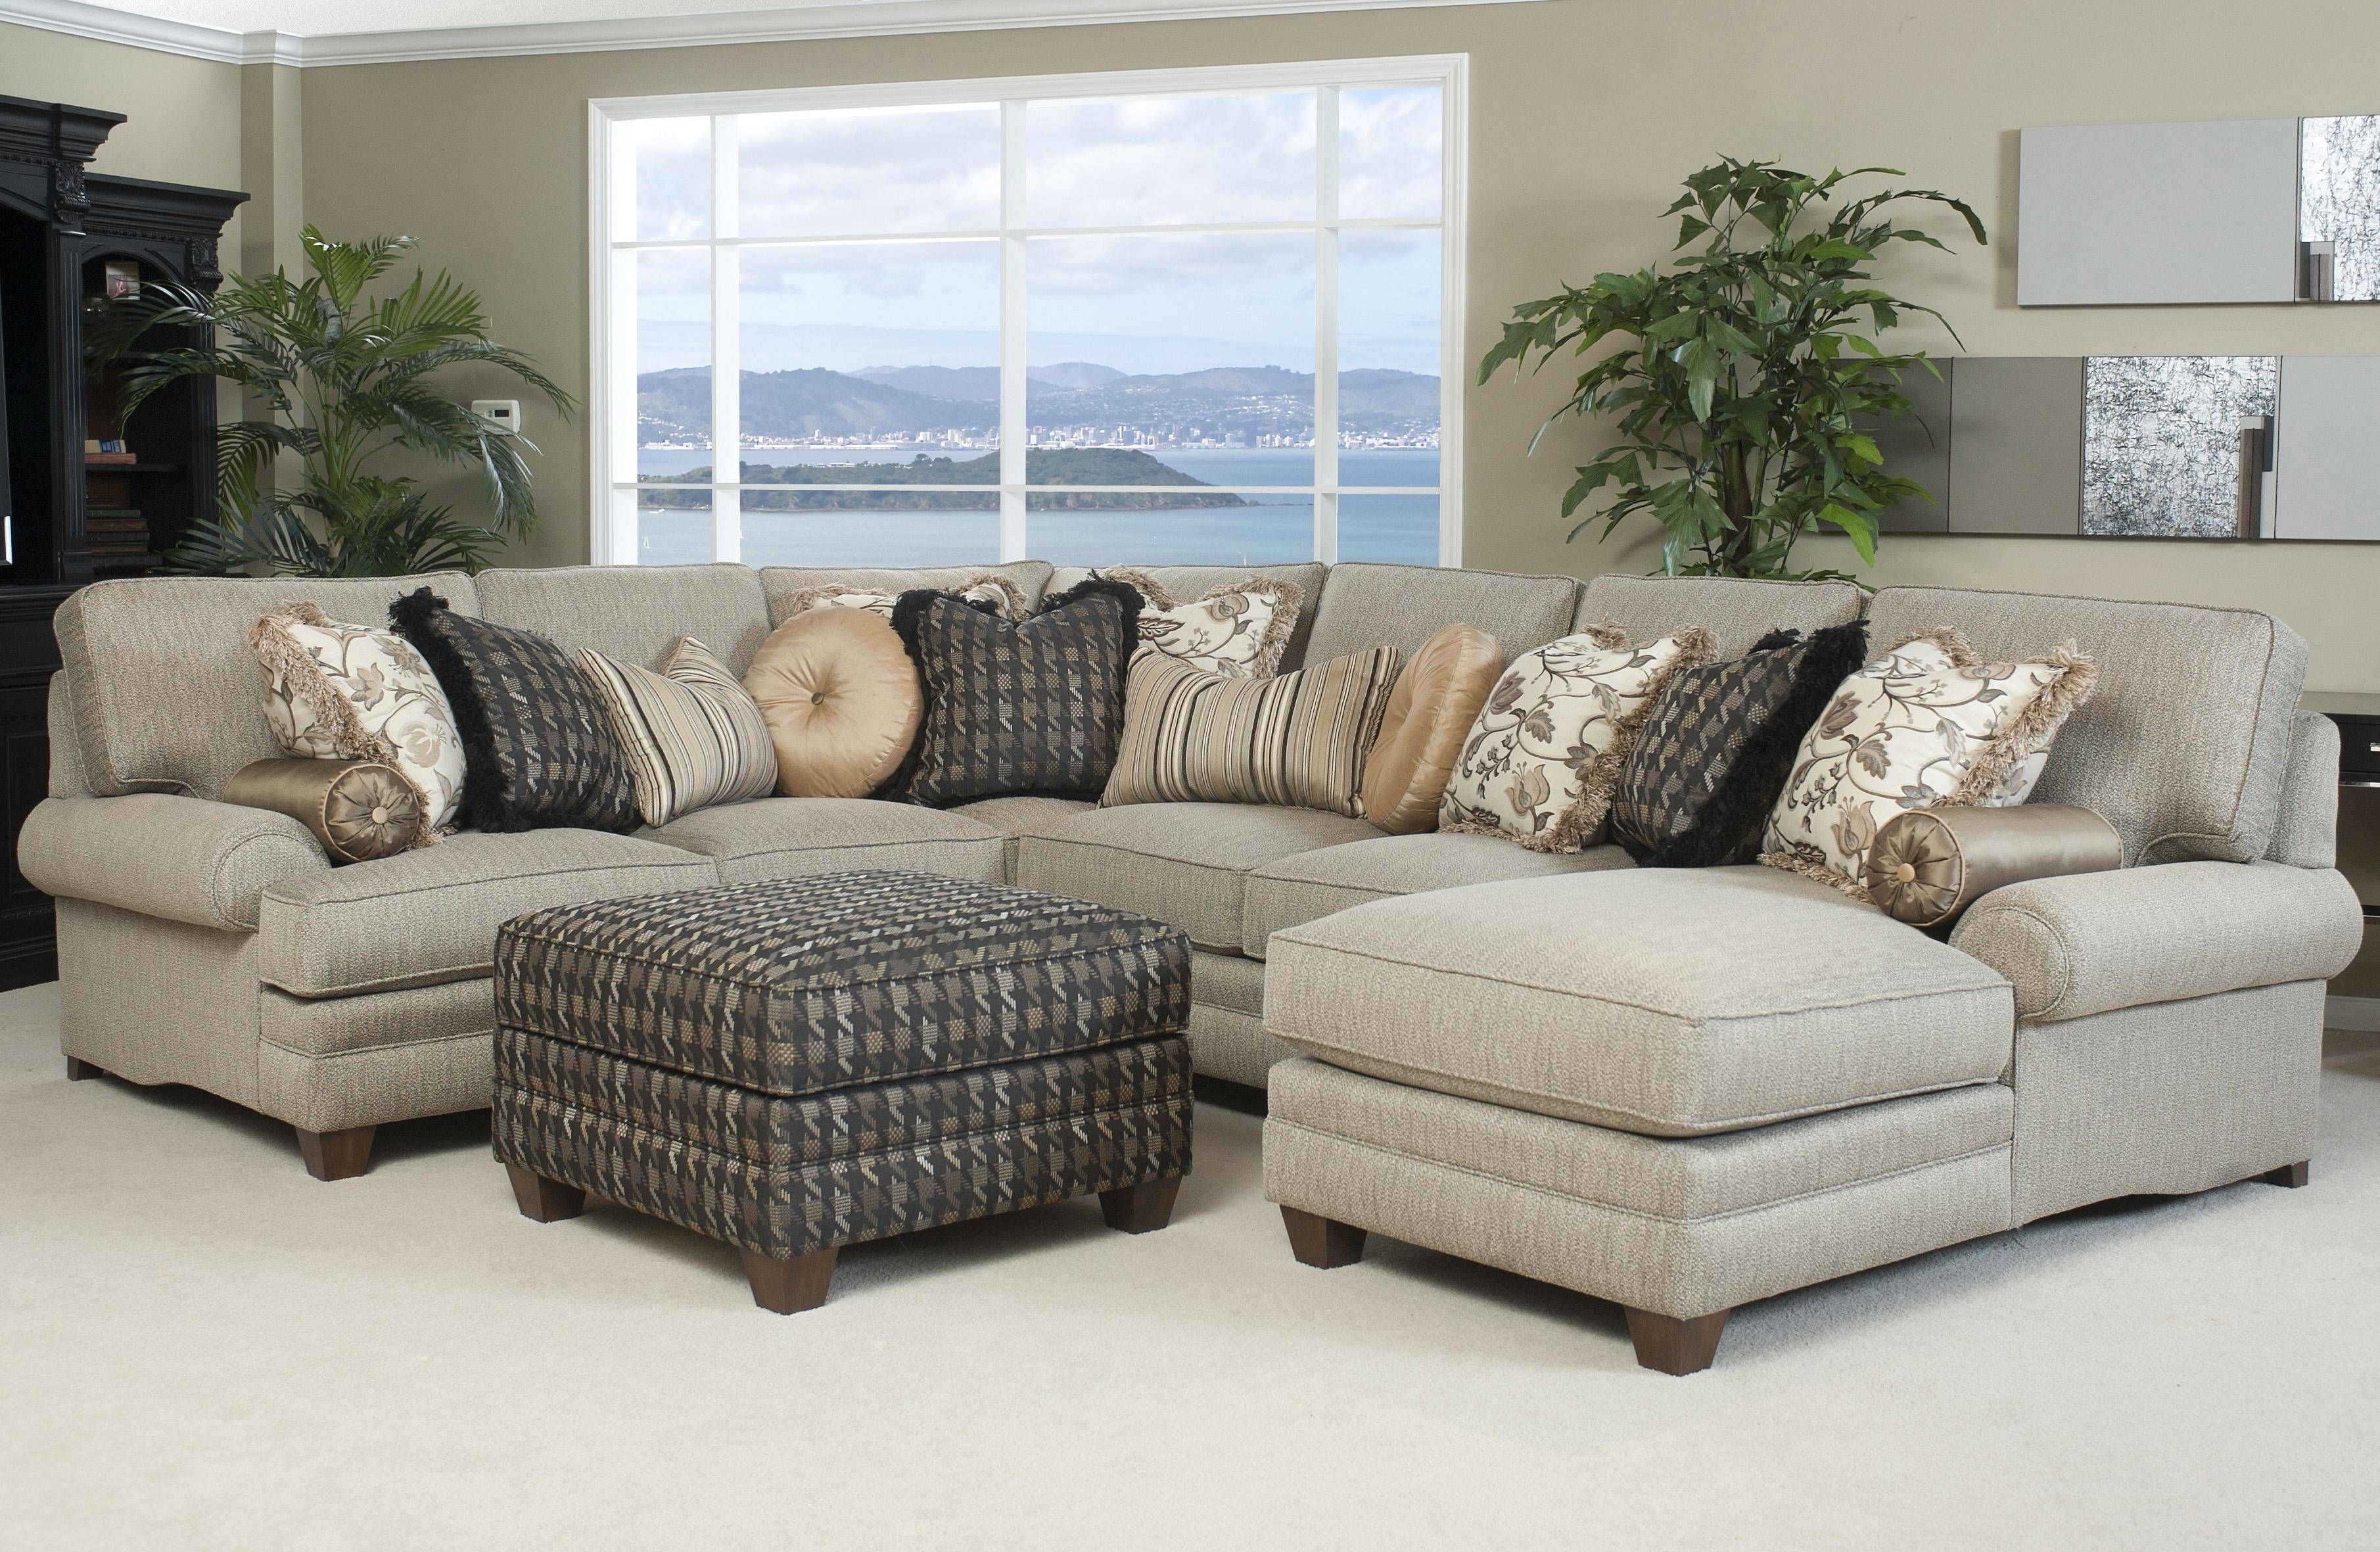 Traditional Styled Sectional Sofa With Comfortable Pillowed Seat Within Comfortable Sectional Sofa (Photo 1 of 30)